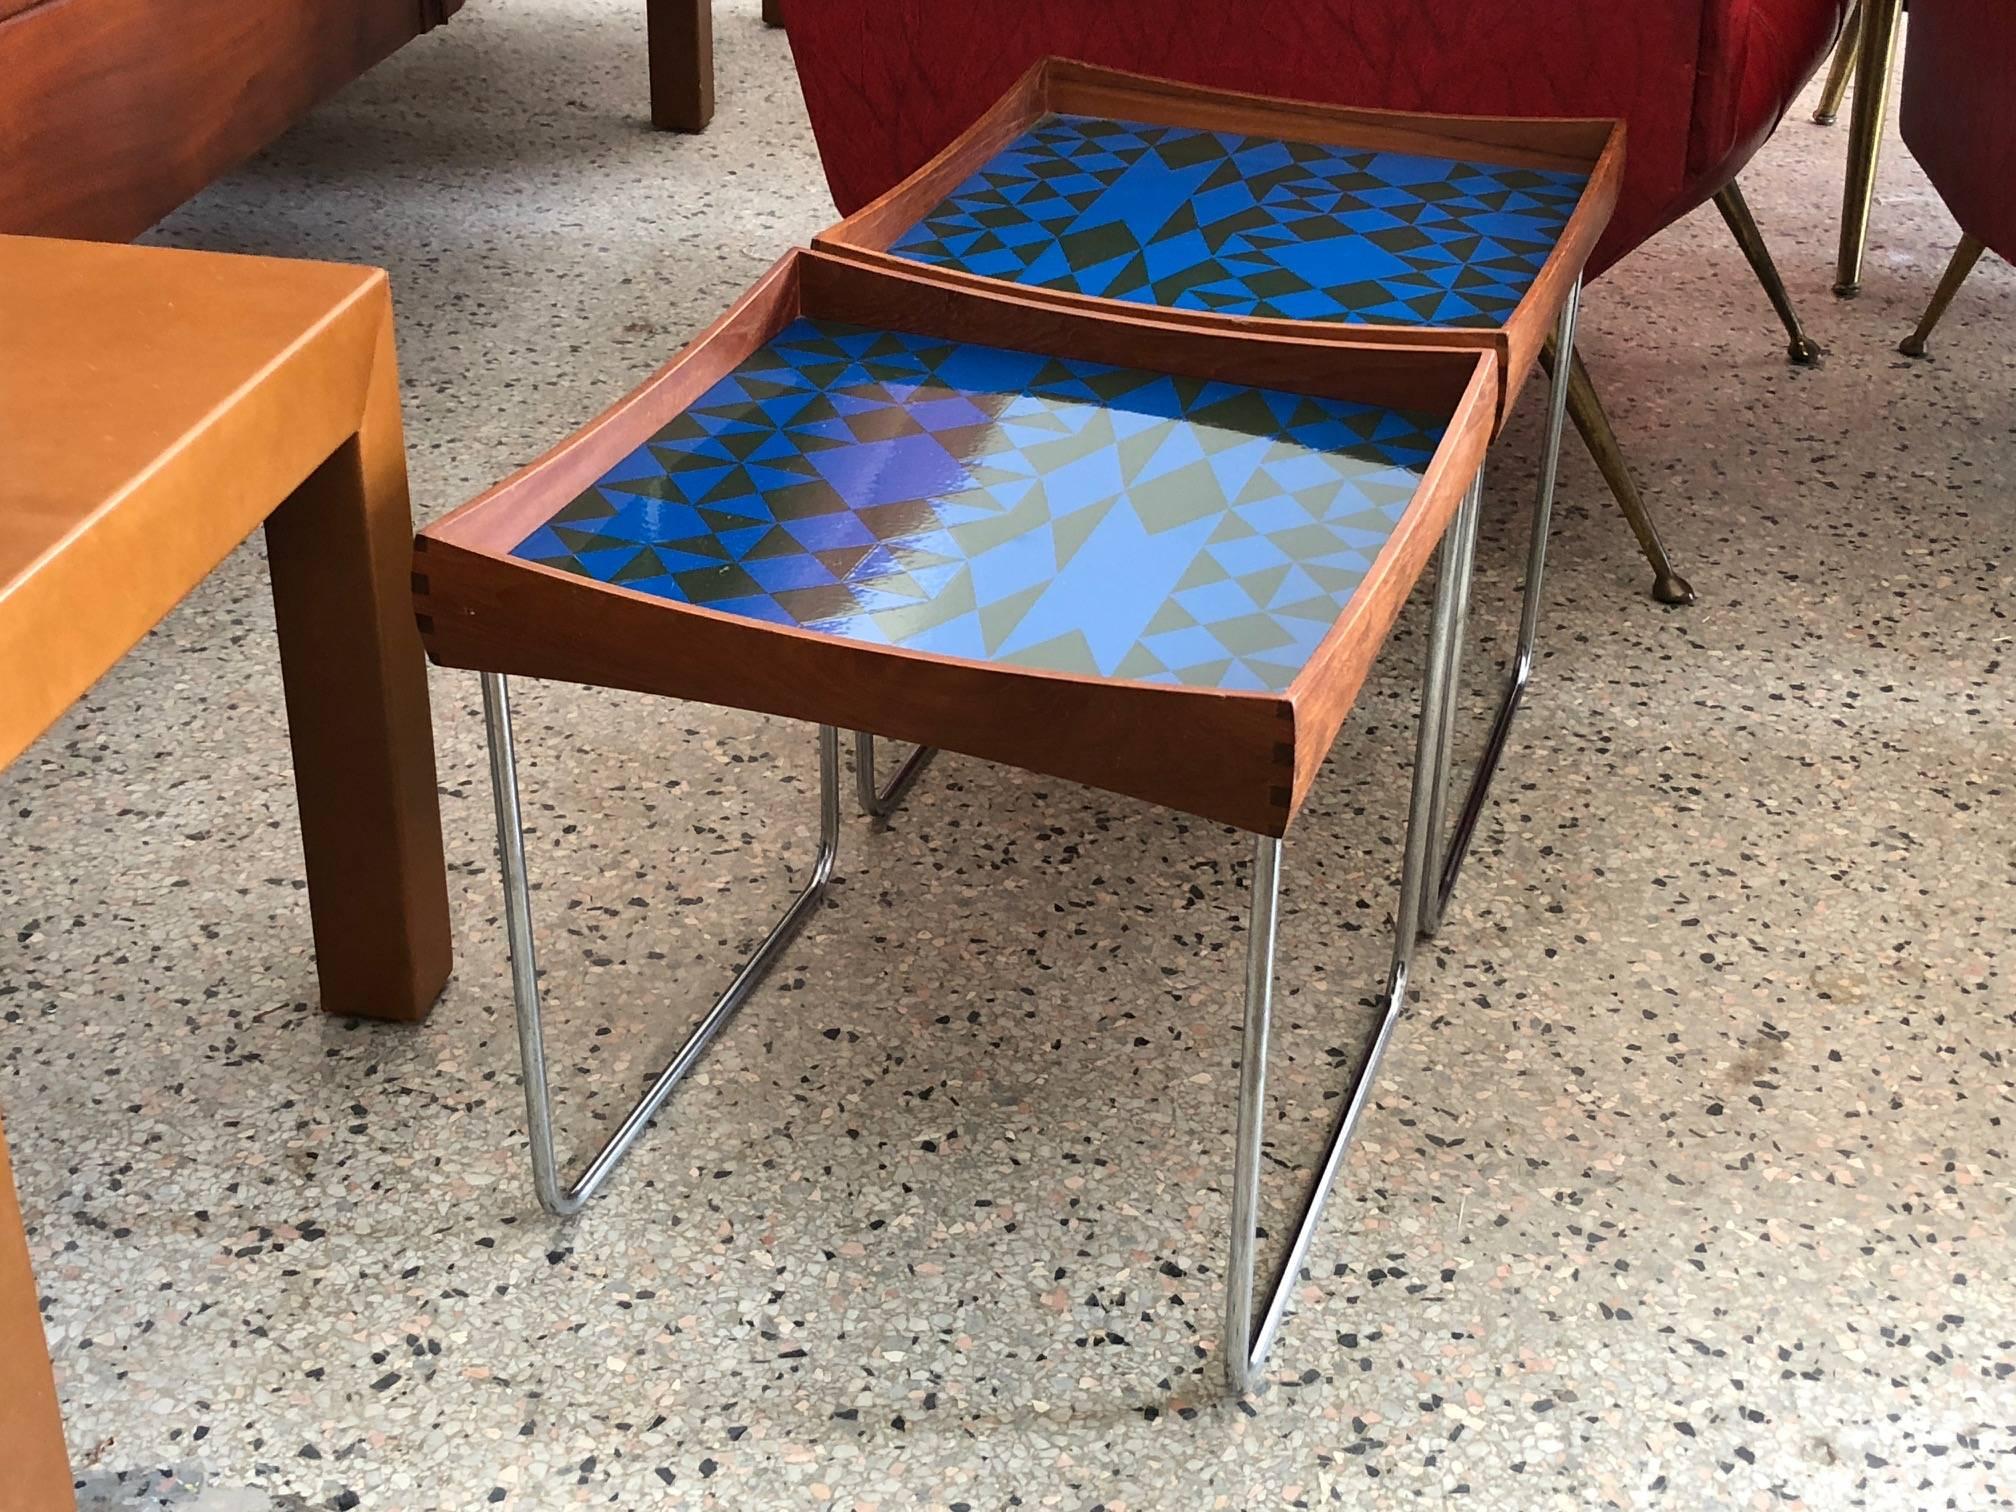 A matched pair of Norwegian enamel tray tables by Hermann Bongard for Plus, circa 1960s. Beautifully executed, removable tray tops in teak with dove tail joinery and an abstract enamel pattern. Legs collapse for easy shipping.